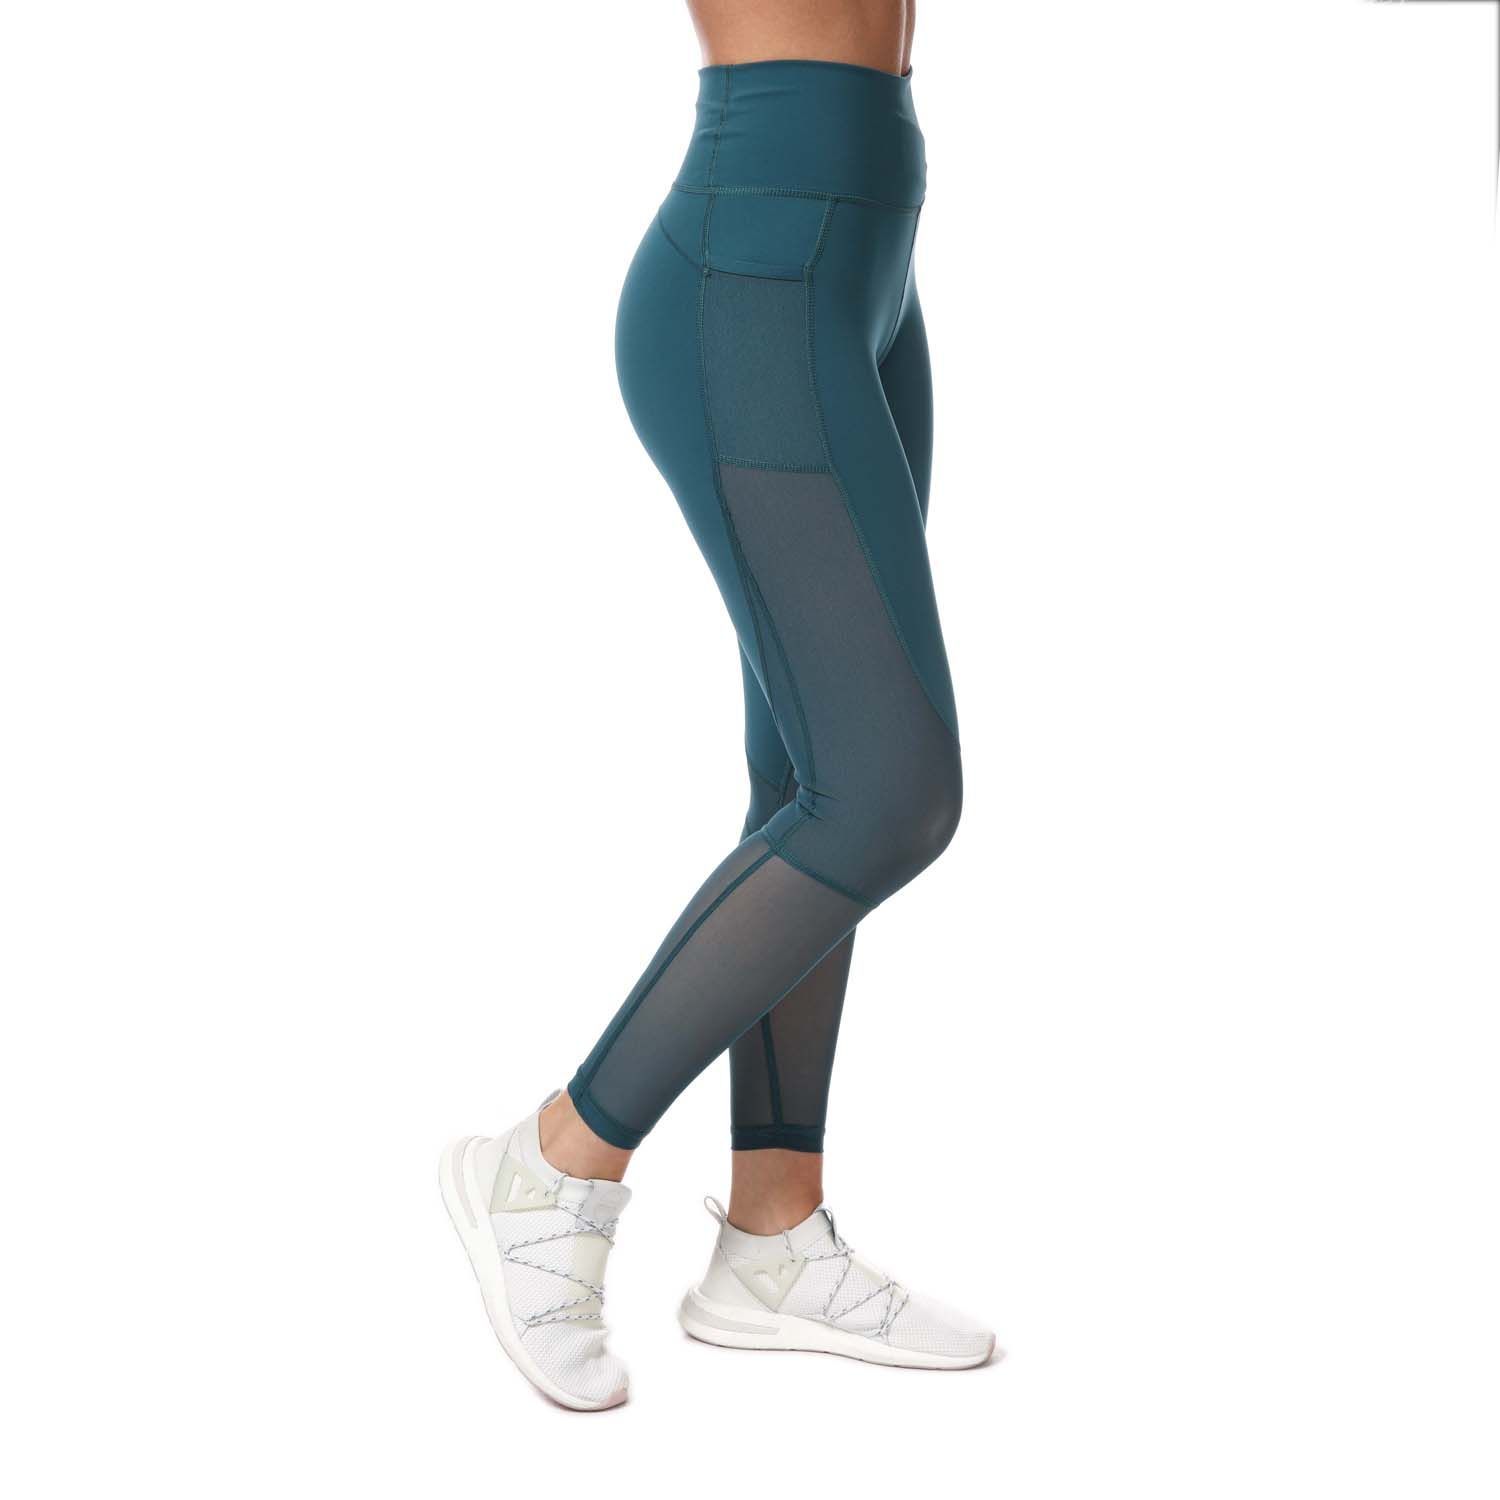 Womens adidas Believe This Summer 7-8 Tights in teal.- High-rise elastic waist.- Mesh side pocket.- Seven-eighth length.- Sweat-wicking AEROREADY technology.- Mesh inserts on legs.- Compression fit.- Main Material: 64% Polyester (Recycled)  36% Elastane. Mesh Part: 82% Polyester (Recycled)  18% Elastane. - Ref: GL0595